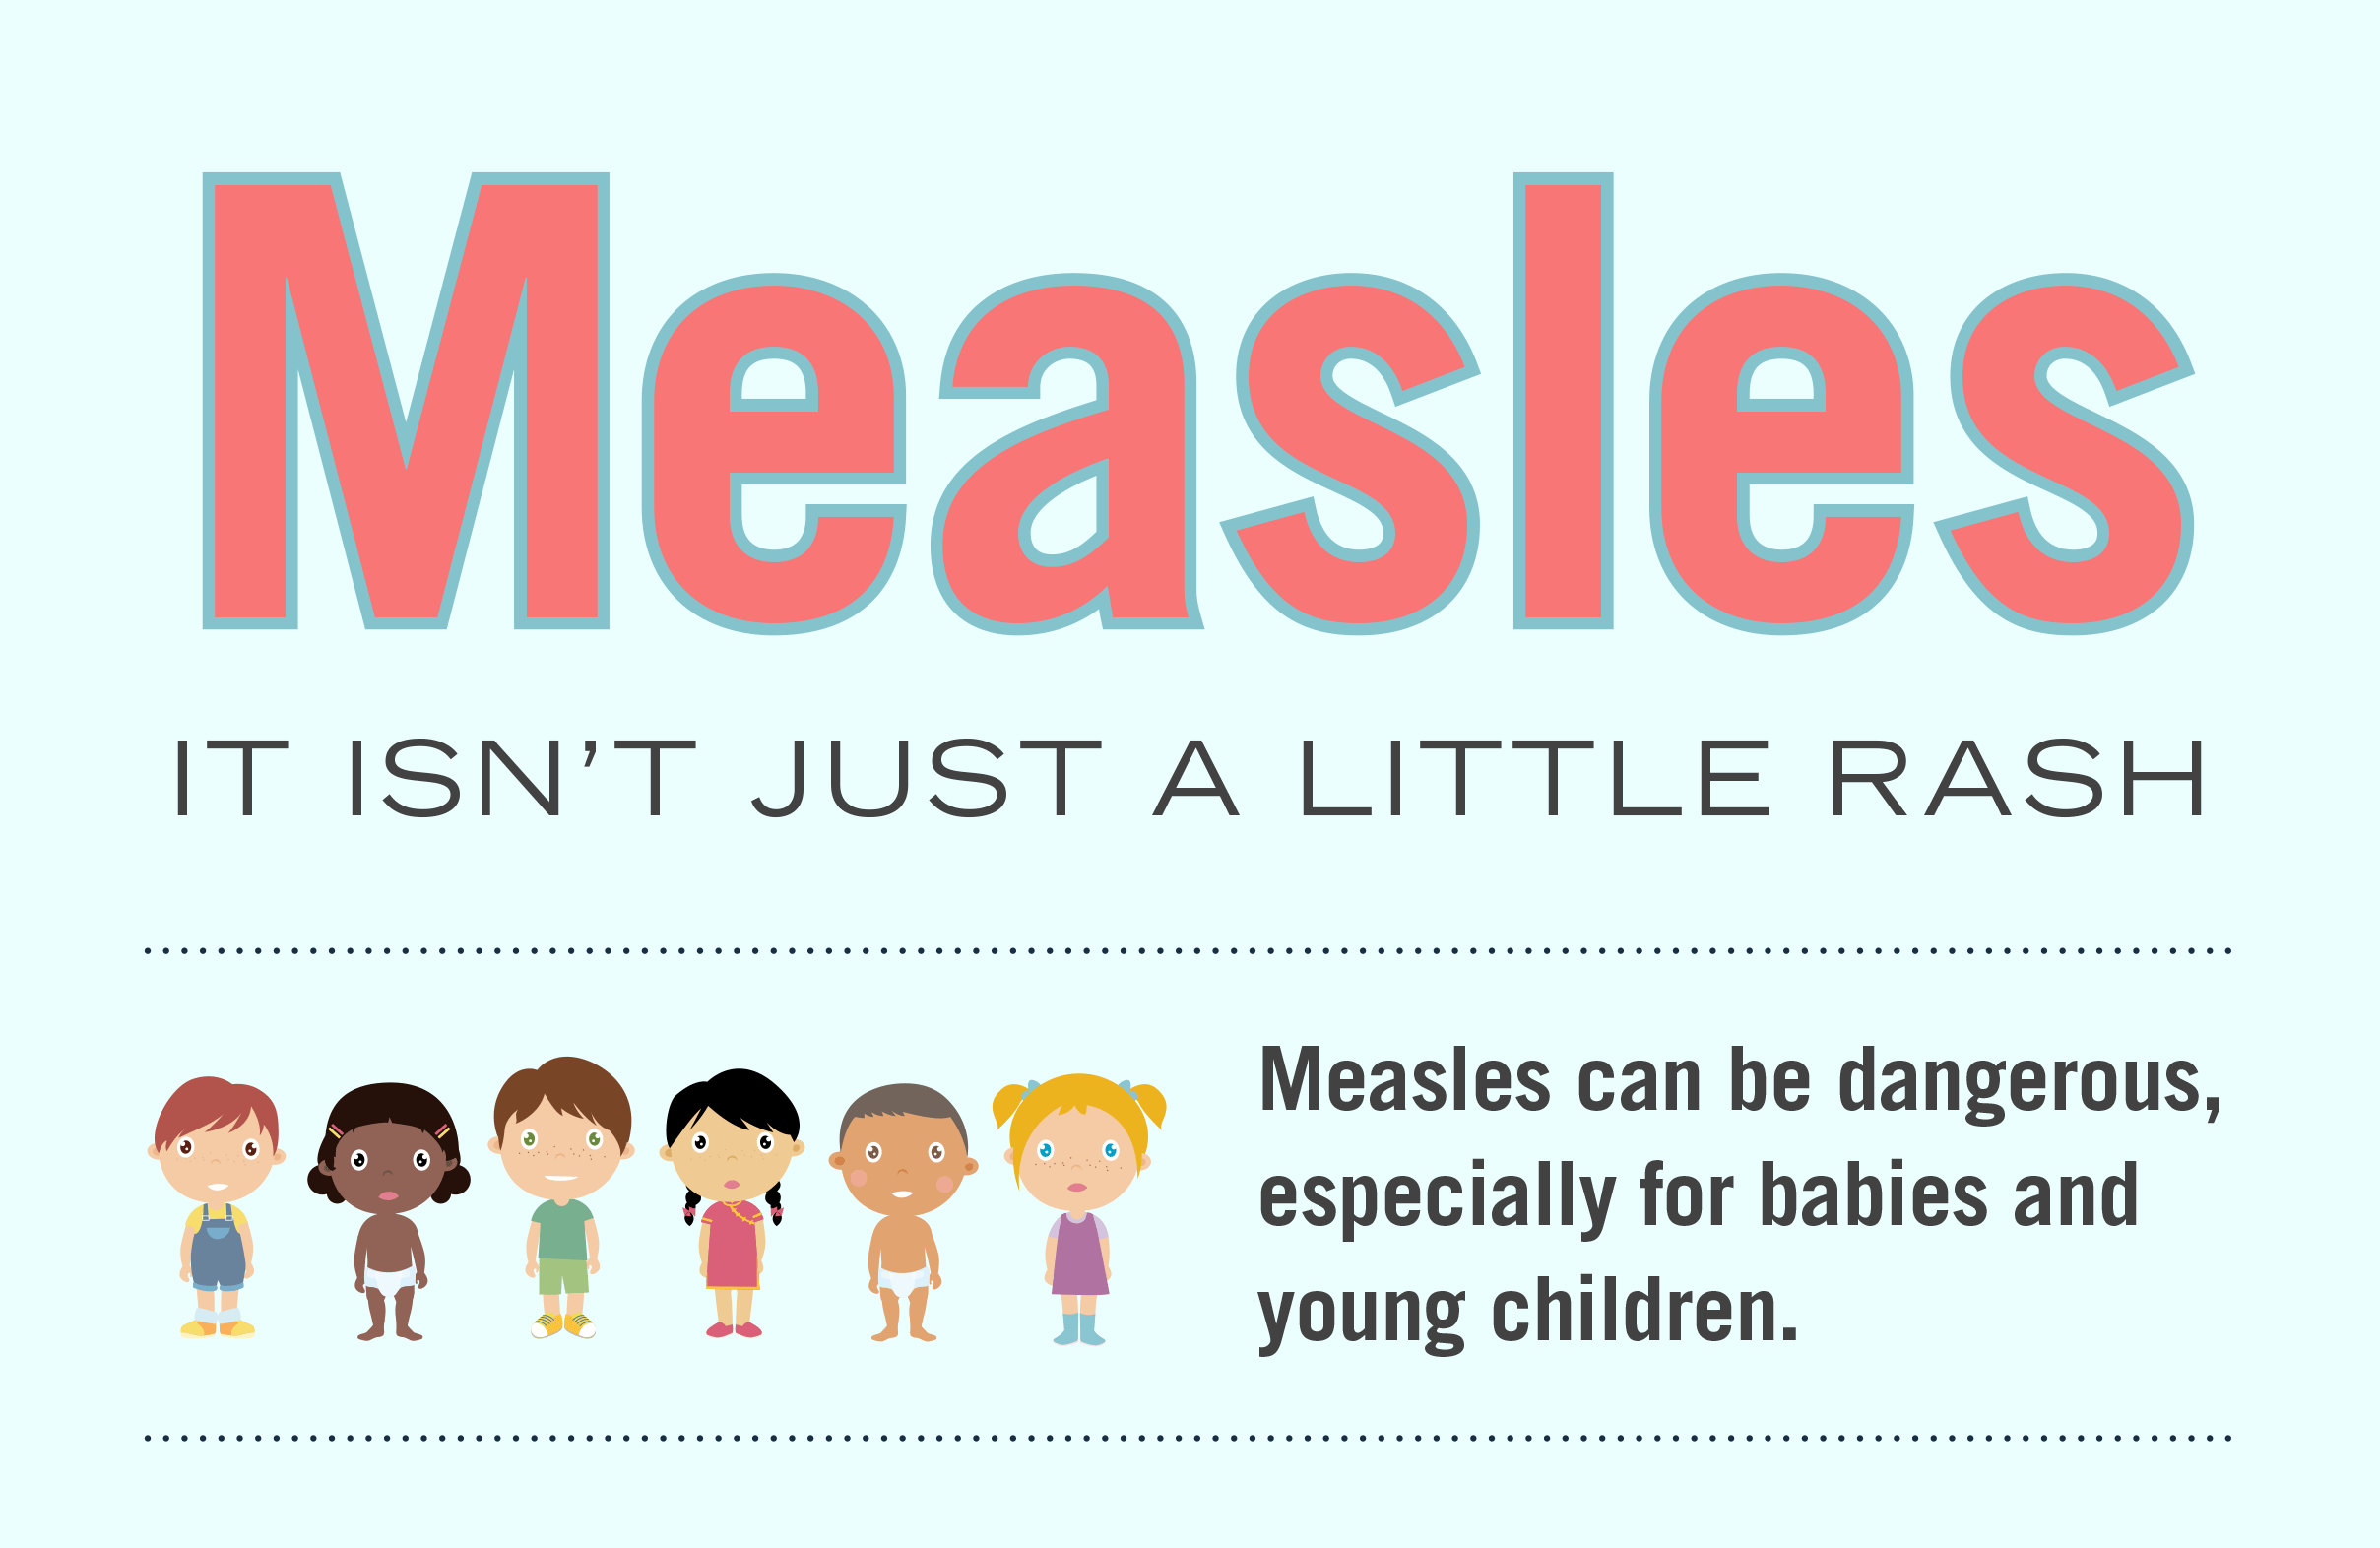 Is measles what How Measles